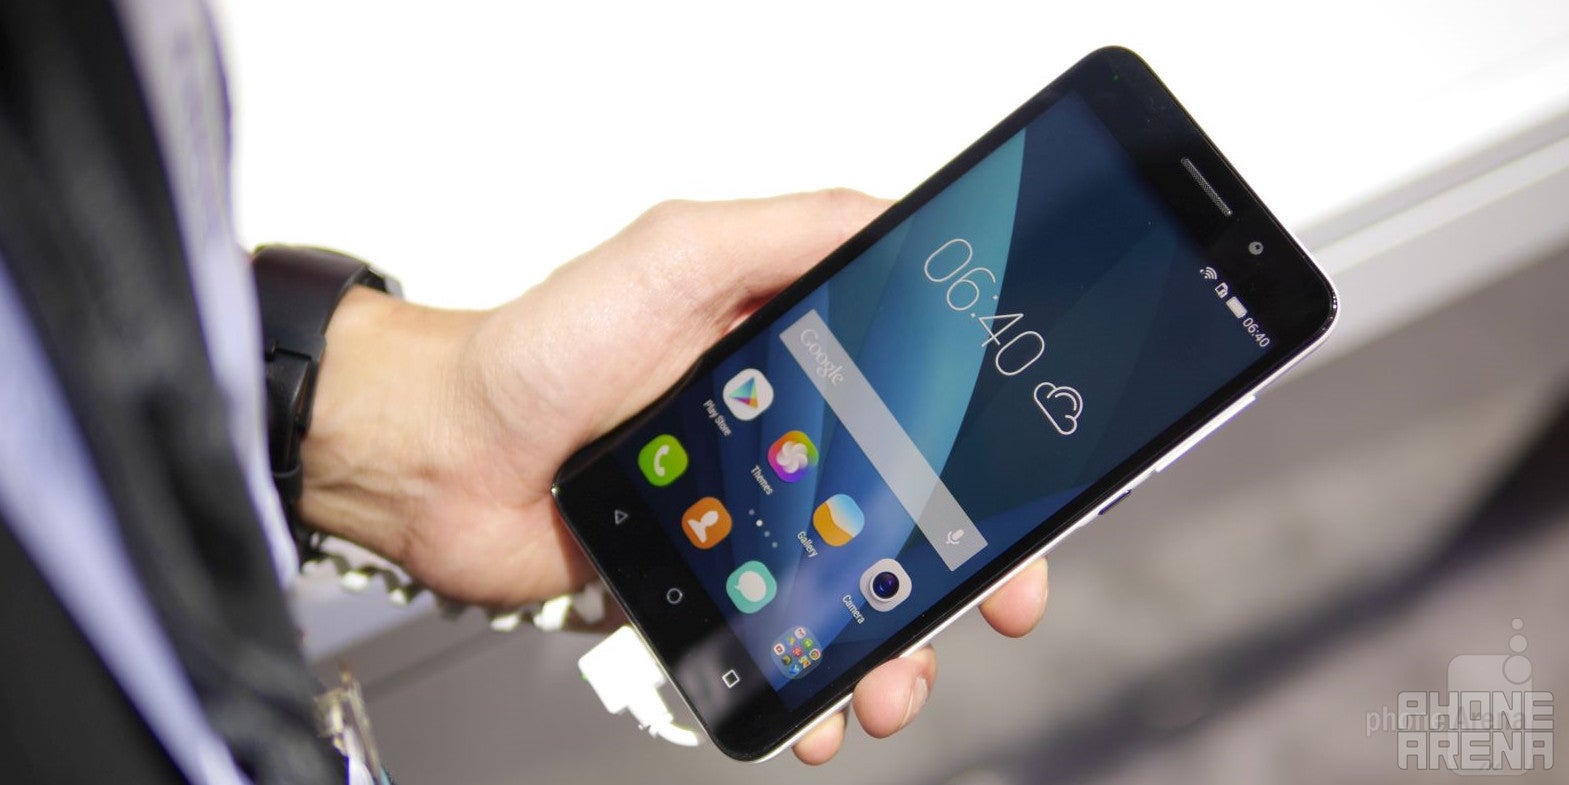 Huawei Honor 4X hands-on